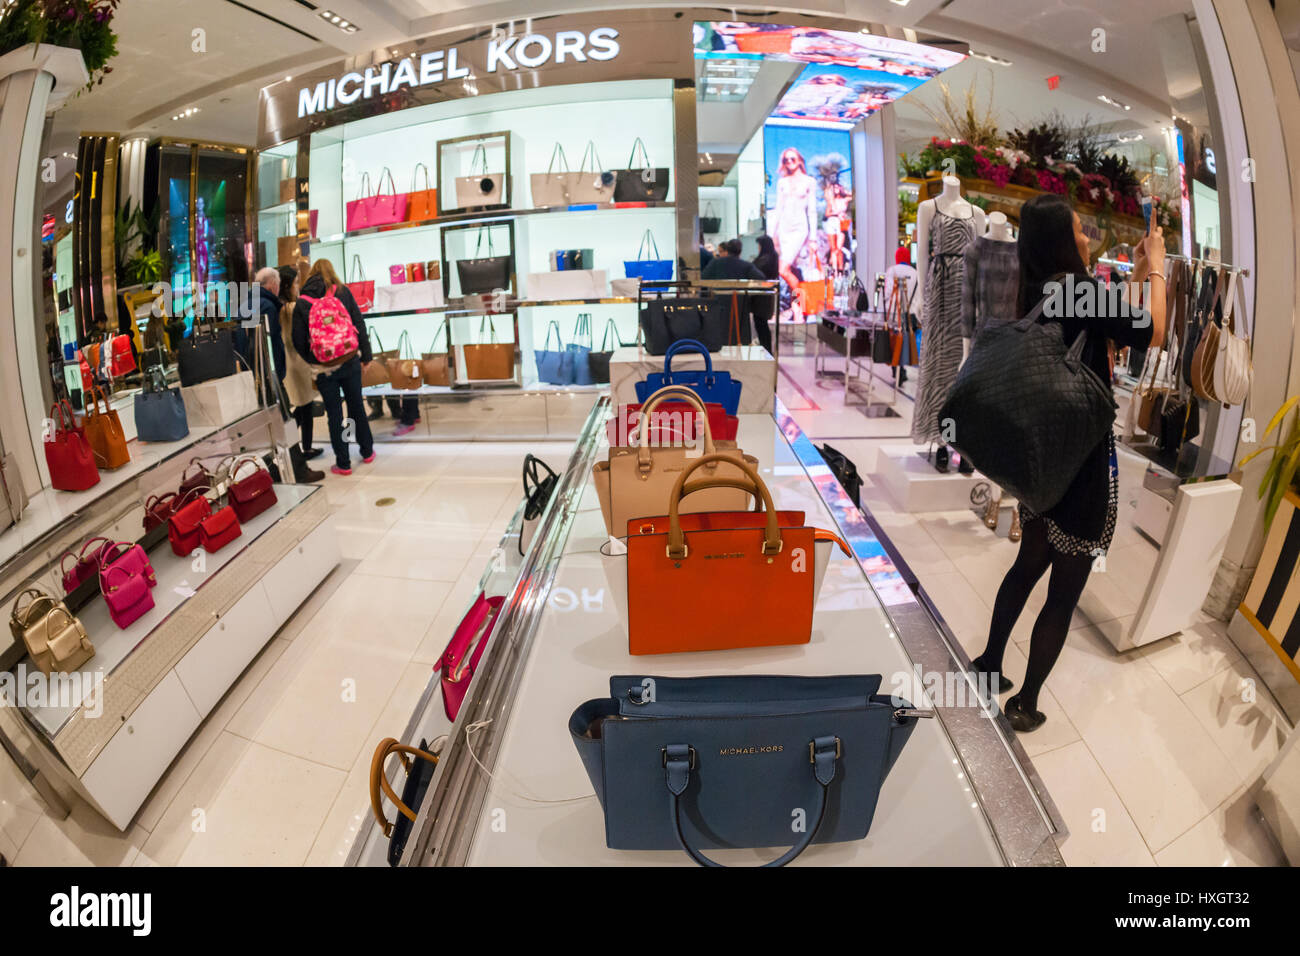 Shoppers browse Michael Kors handbags in the Macy's Herald Square flagship  store on Sunday, March 26, 2017. (© Richard B. Levine Stock Photo - Alamy